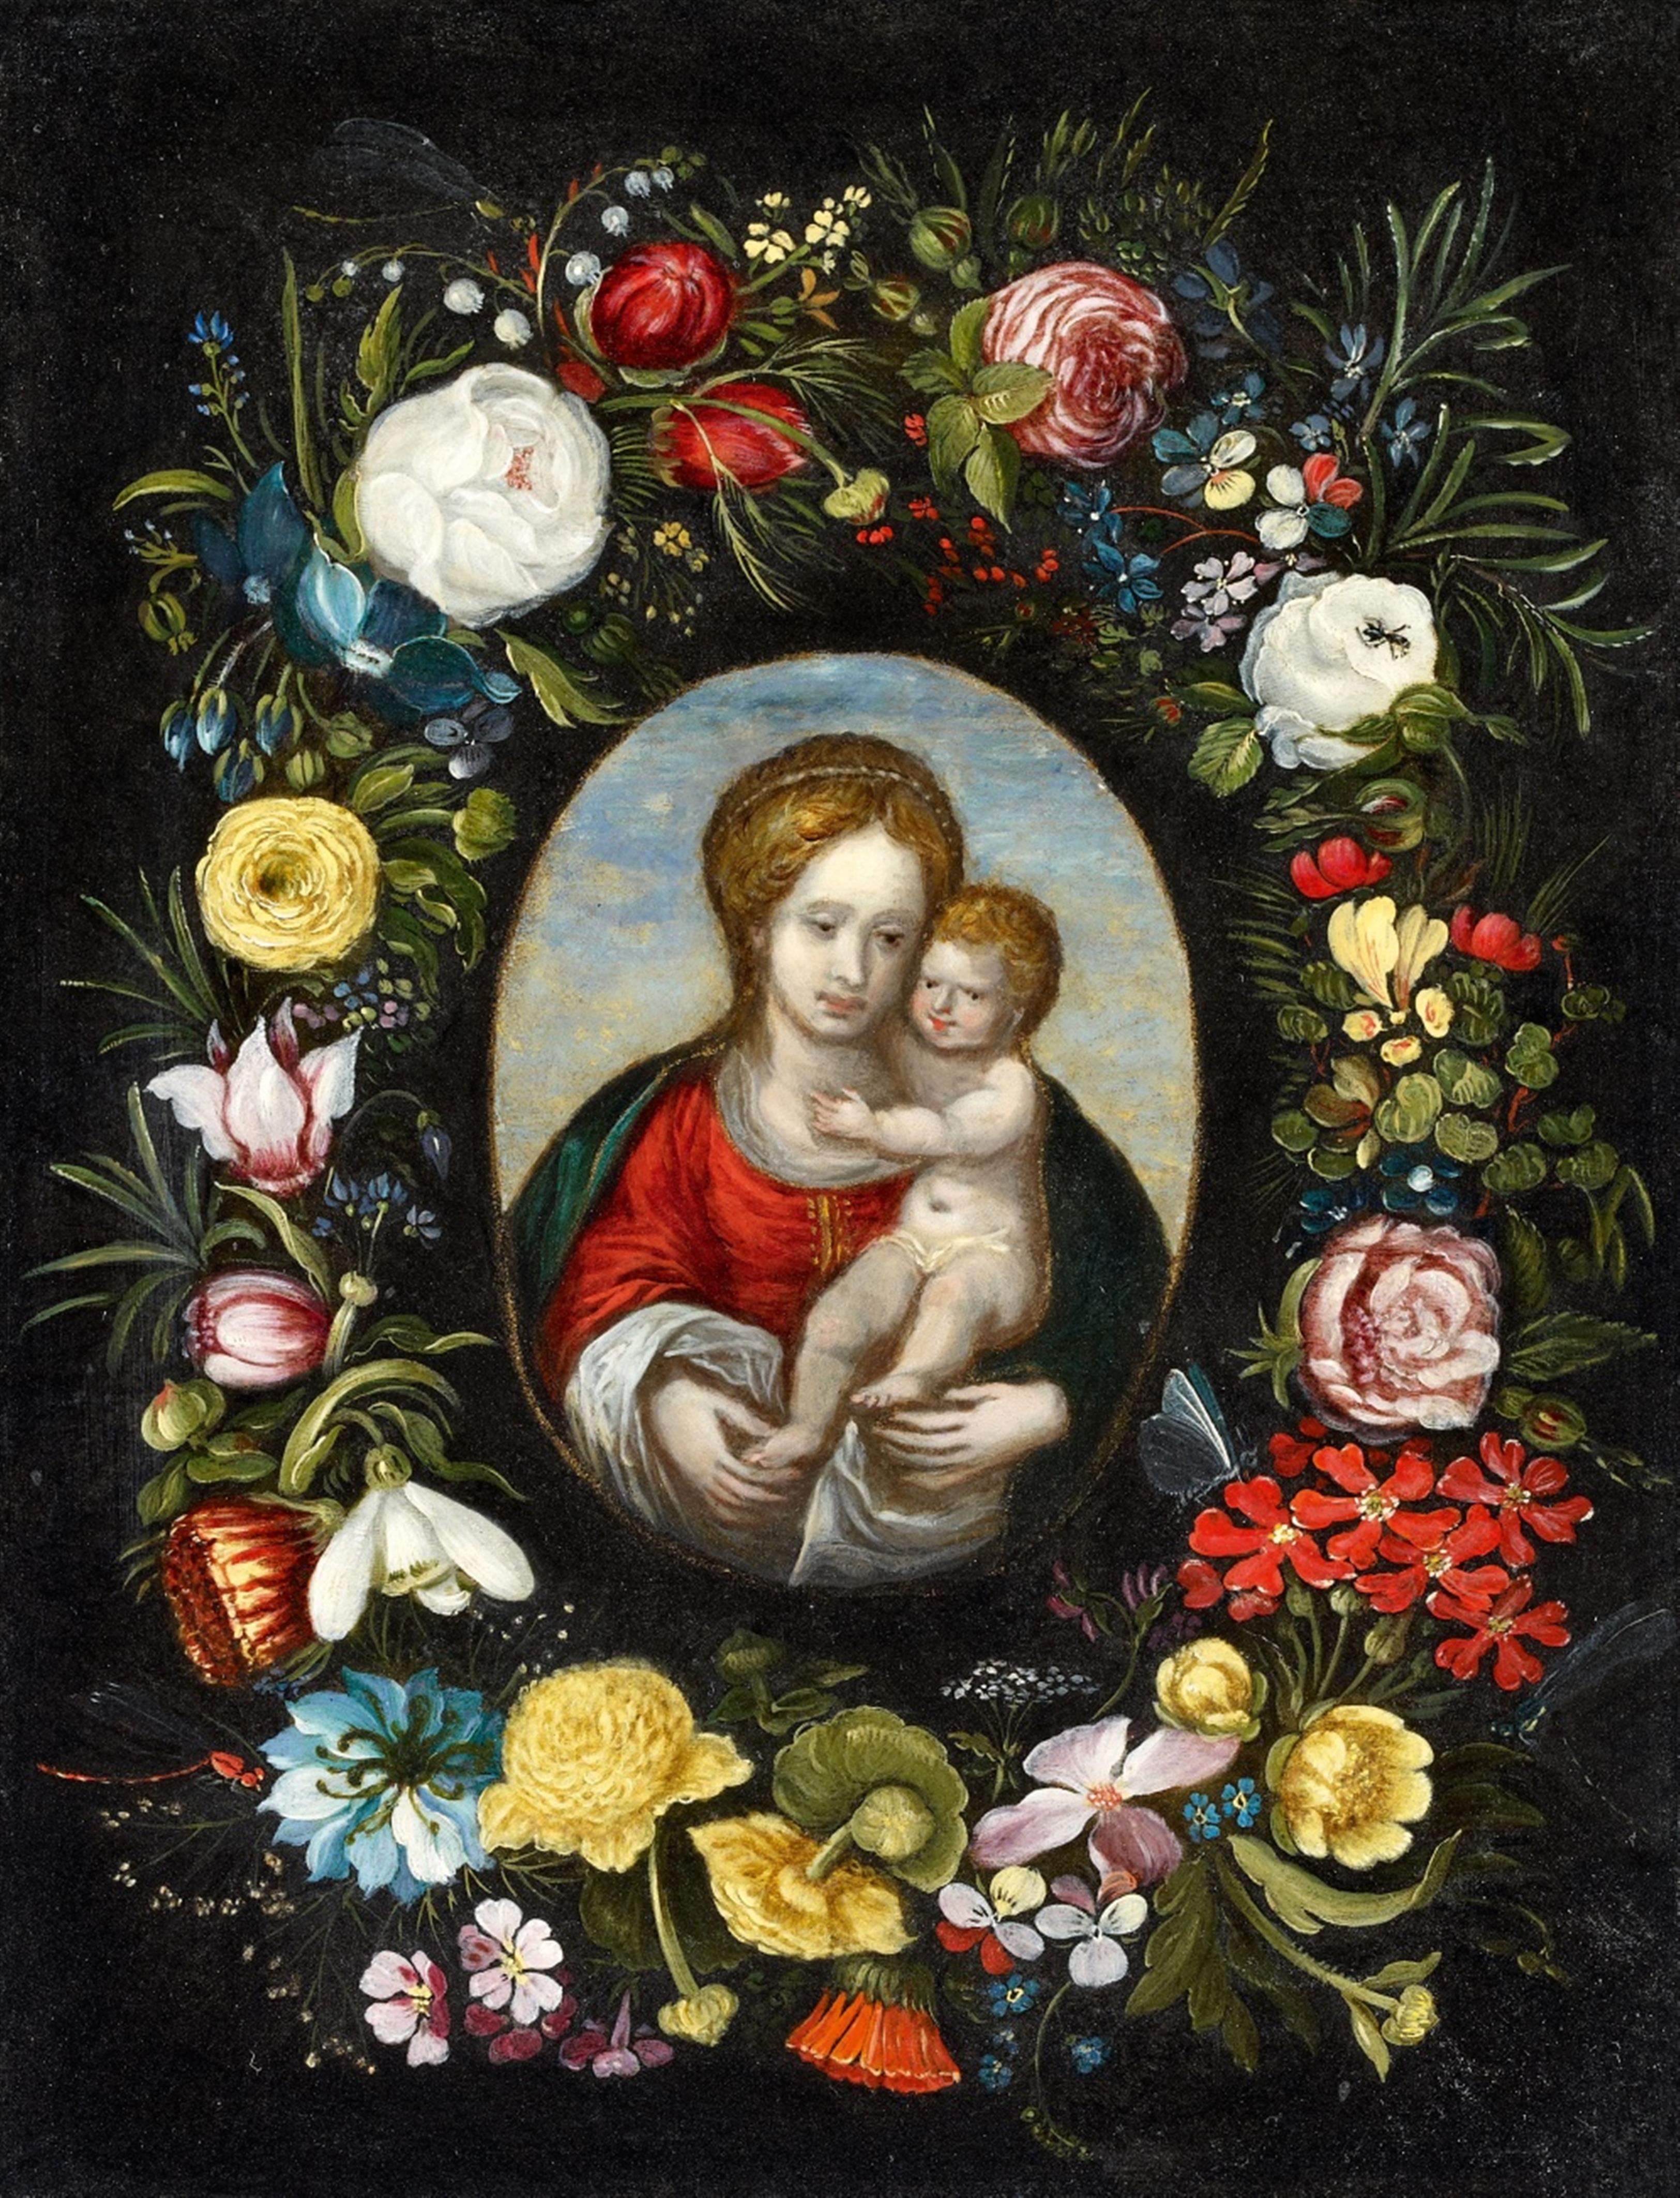 Jan Brueghel the Younger, attributed to - A Flower Garland with Madonna and Child in a Medaillon - image-1